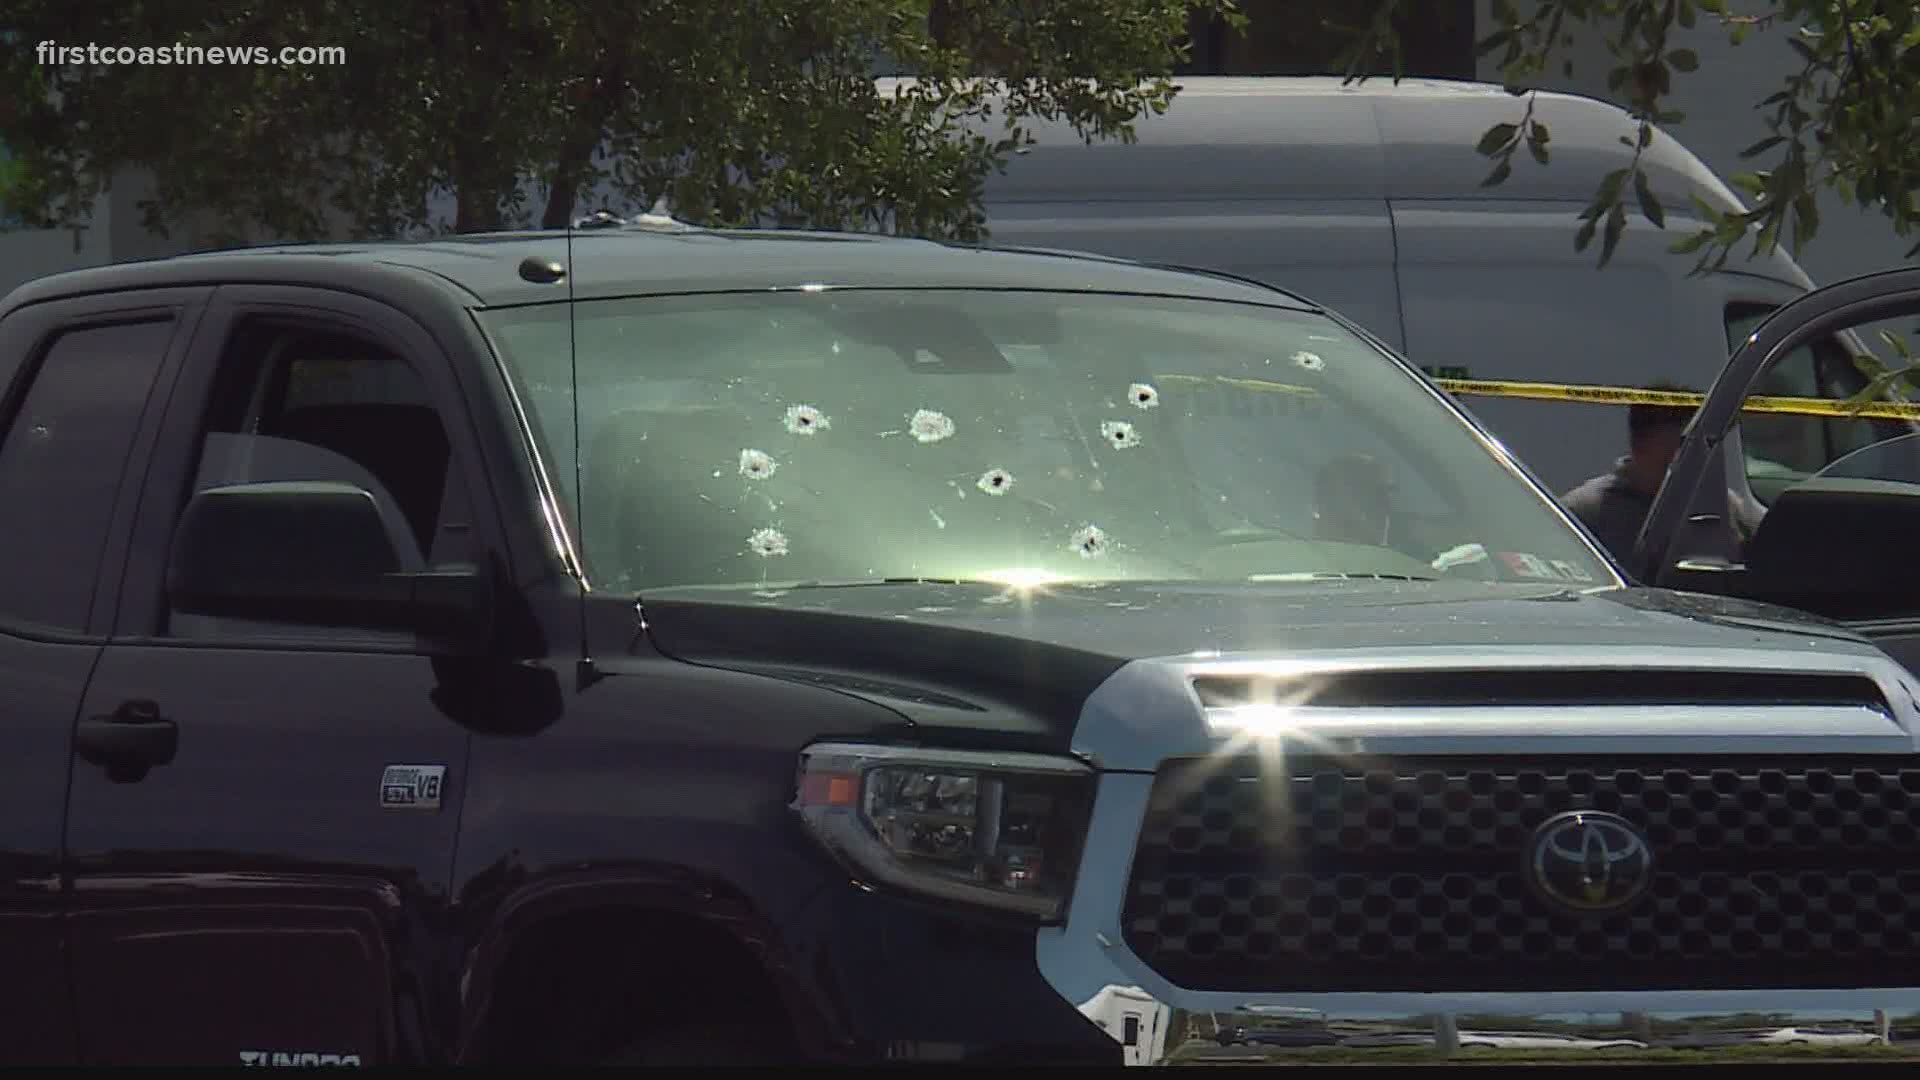 The man was taken to the hospital for treatment after he opened fire on deputies while they were trying to conduct a traffic stop on a stolen vehicle.